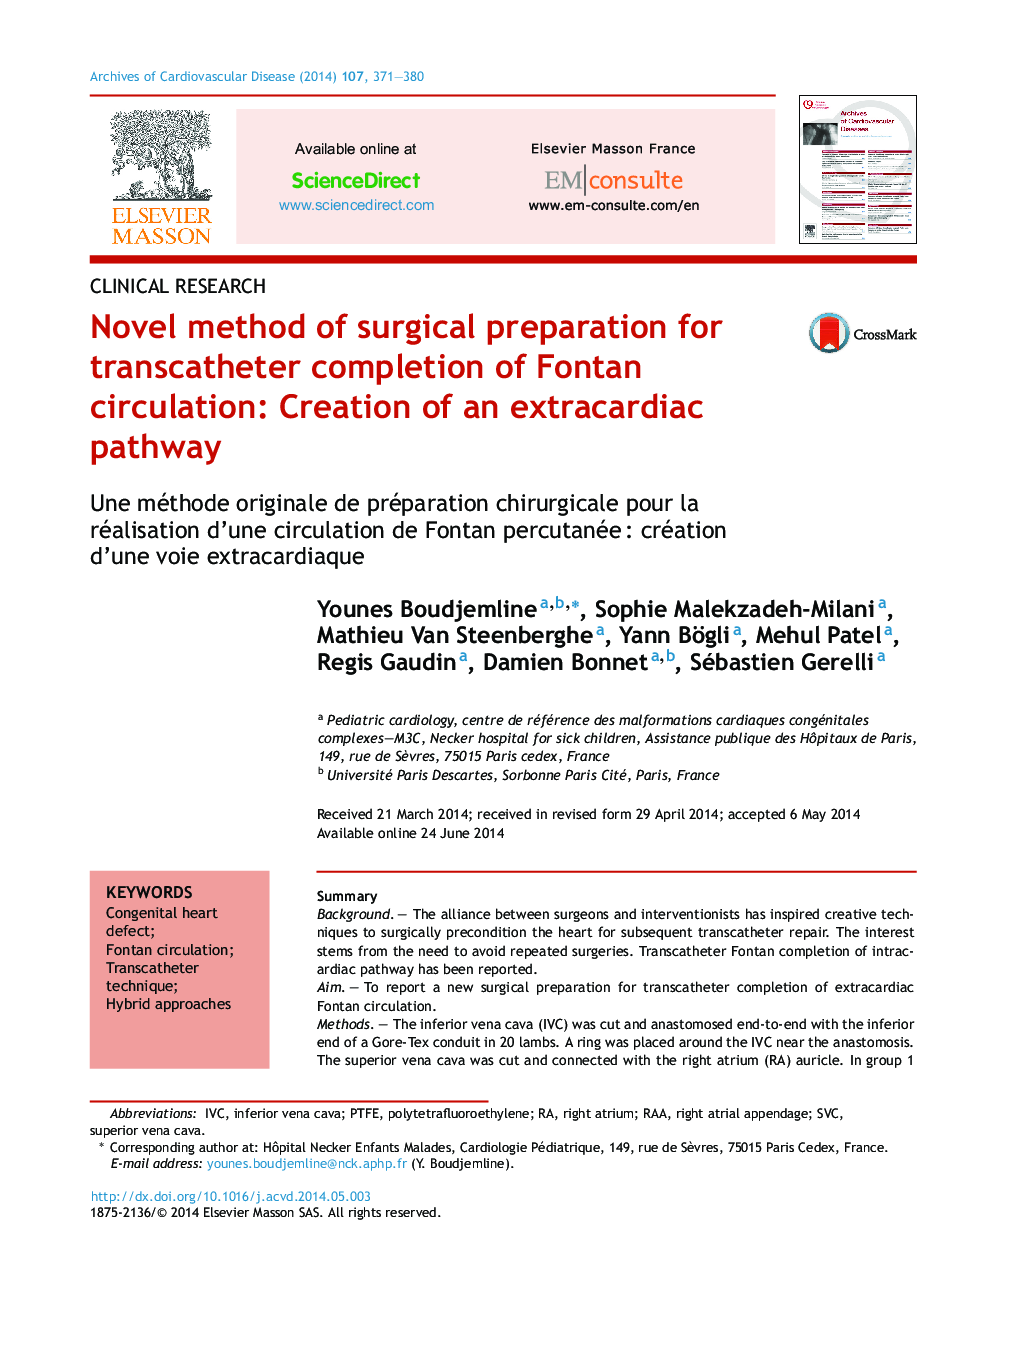 Novel method of surgical preparation for transcatheter completion of Fontan circulation: Creation of an extracardiac pathway